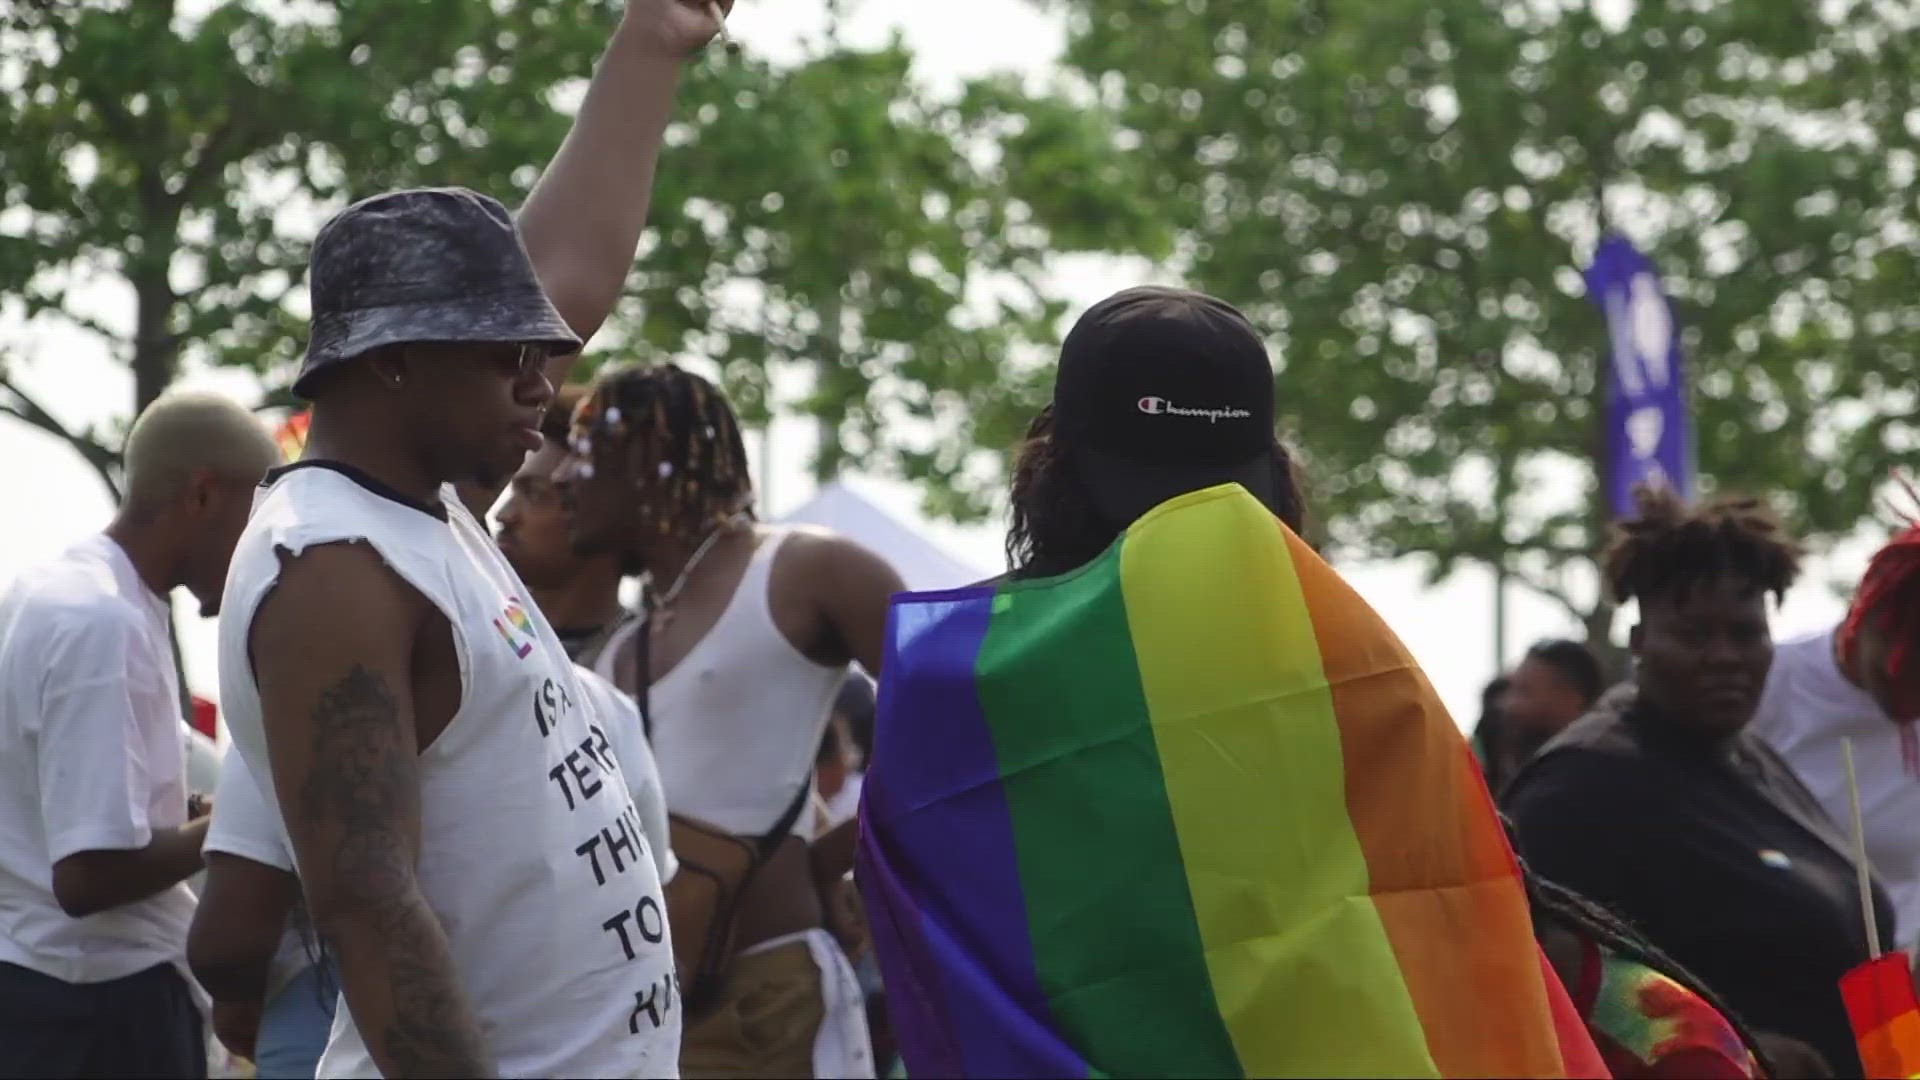 Cleveland's LGBTQ+ community gathered for a rousing celebration on Saturday.